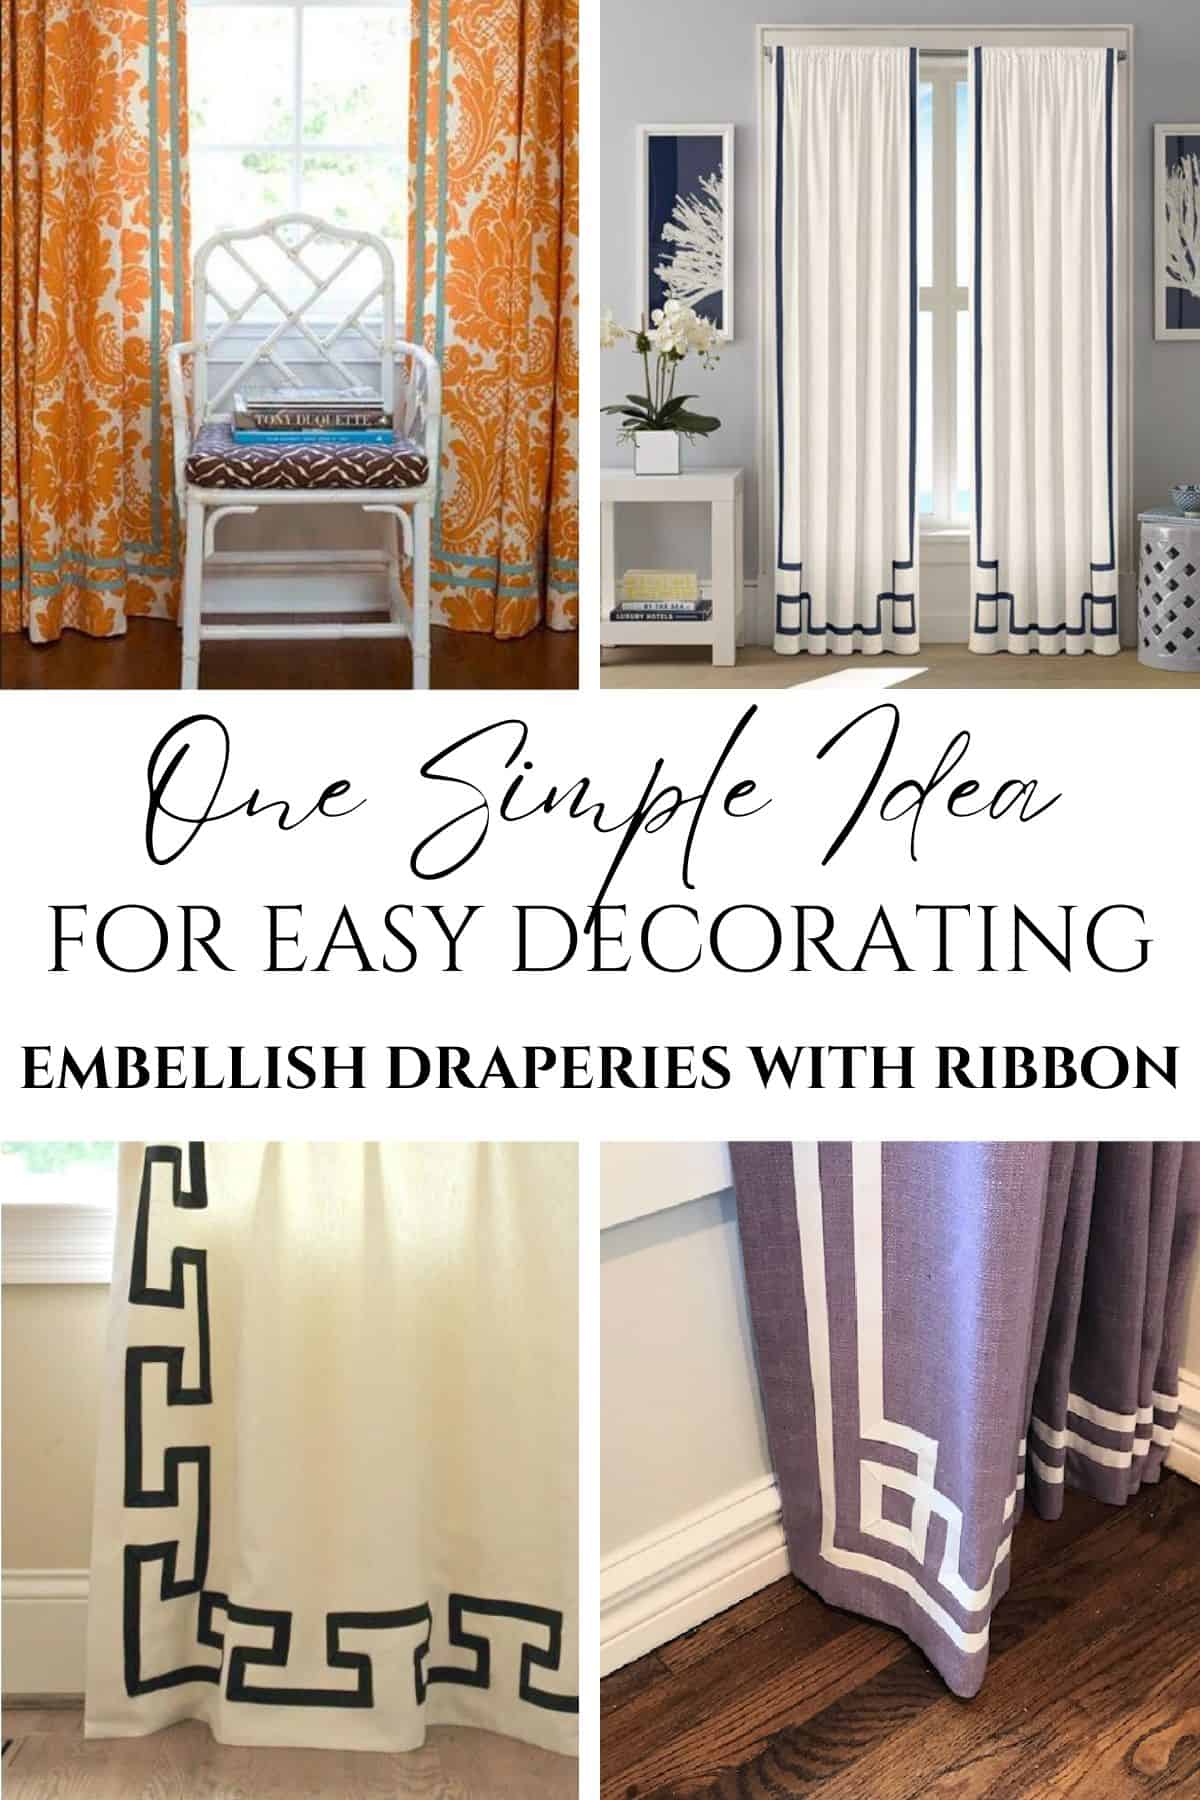 pinterest graphic for embellishing curtains with grosgrain ribbon